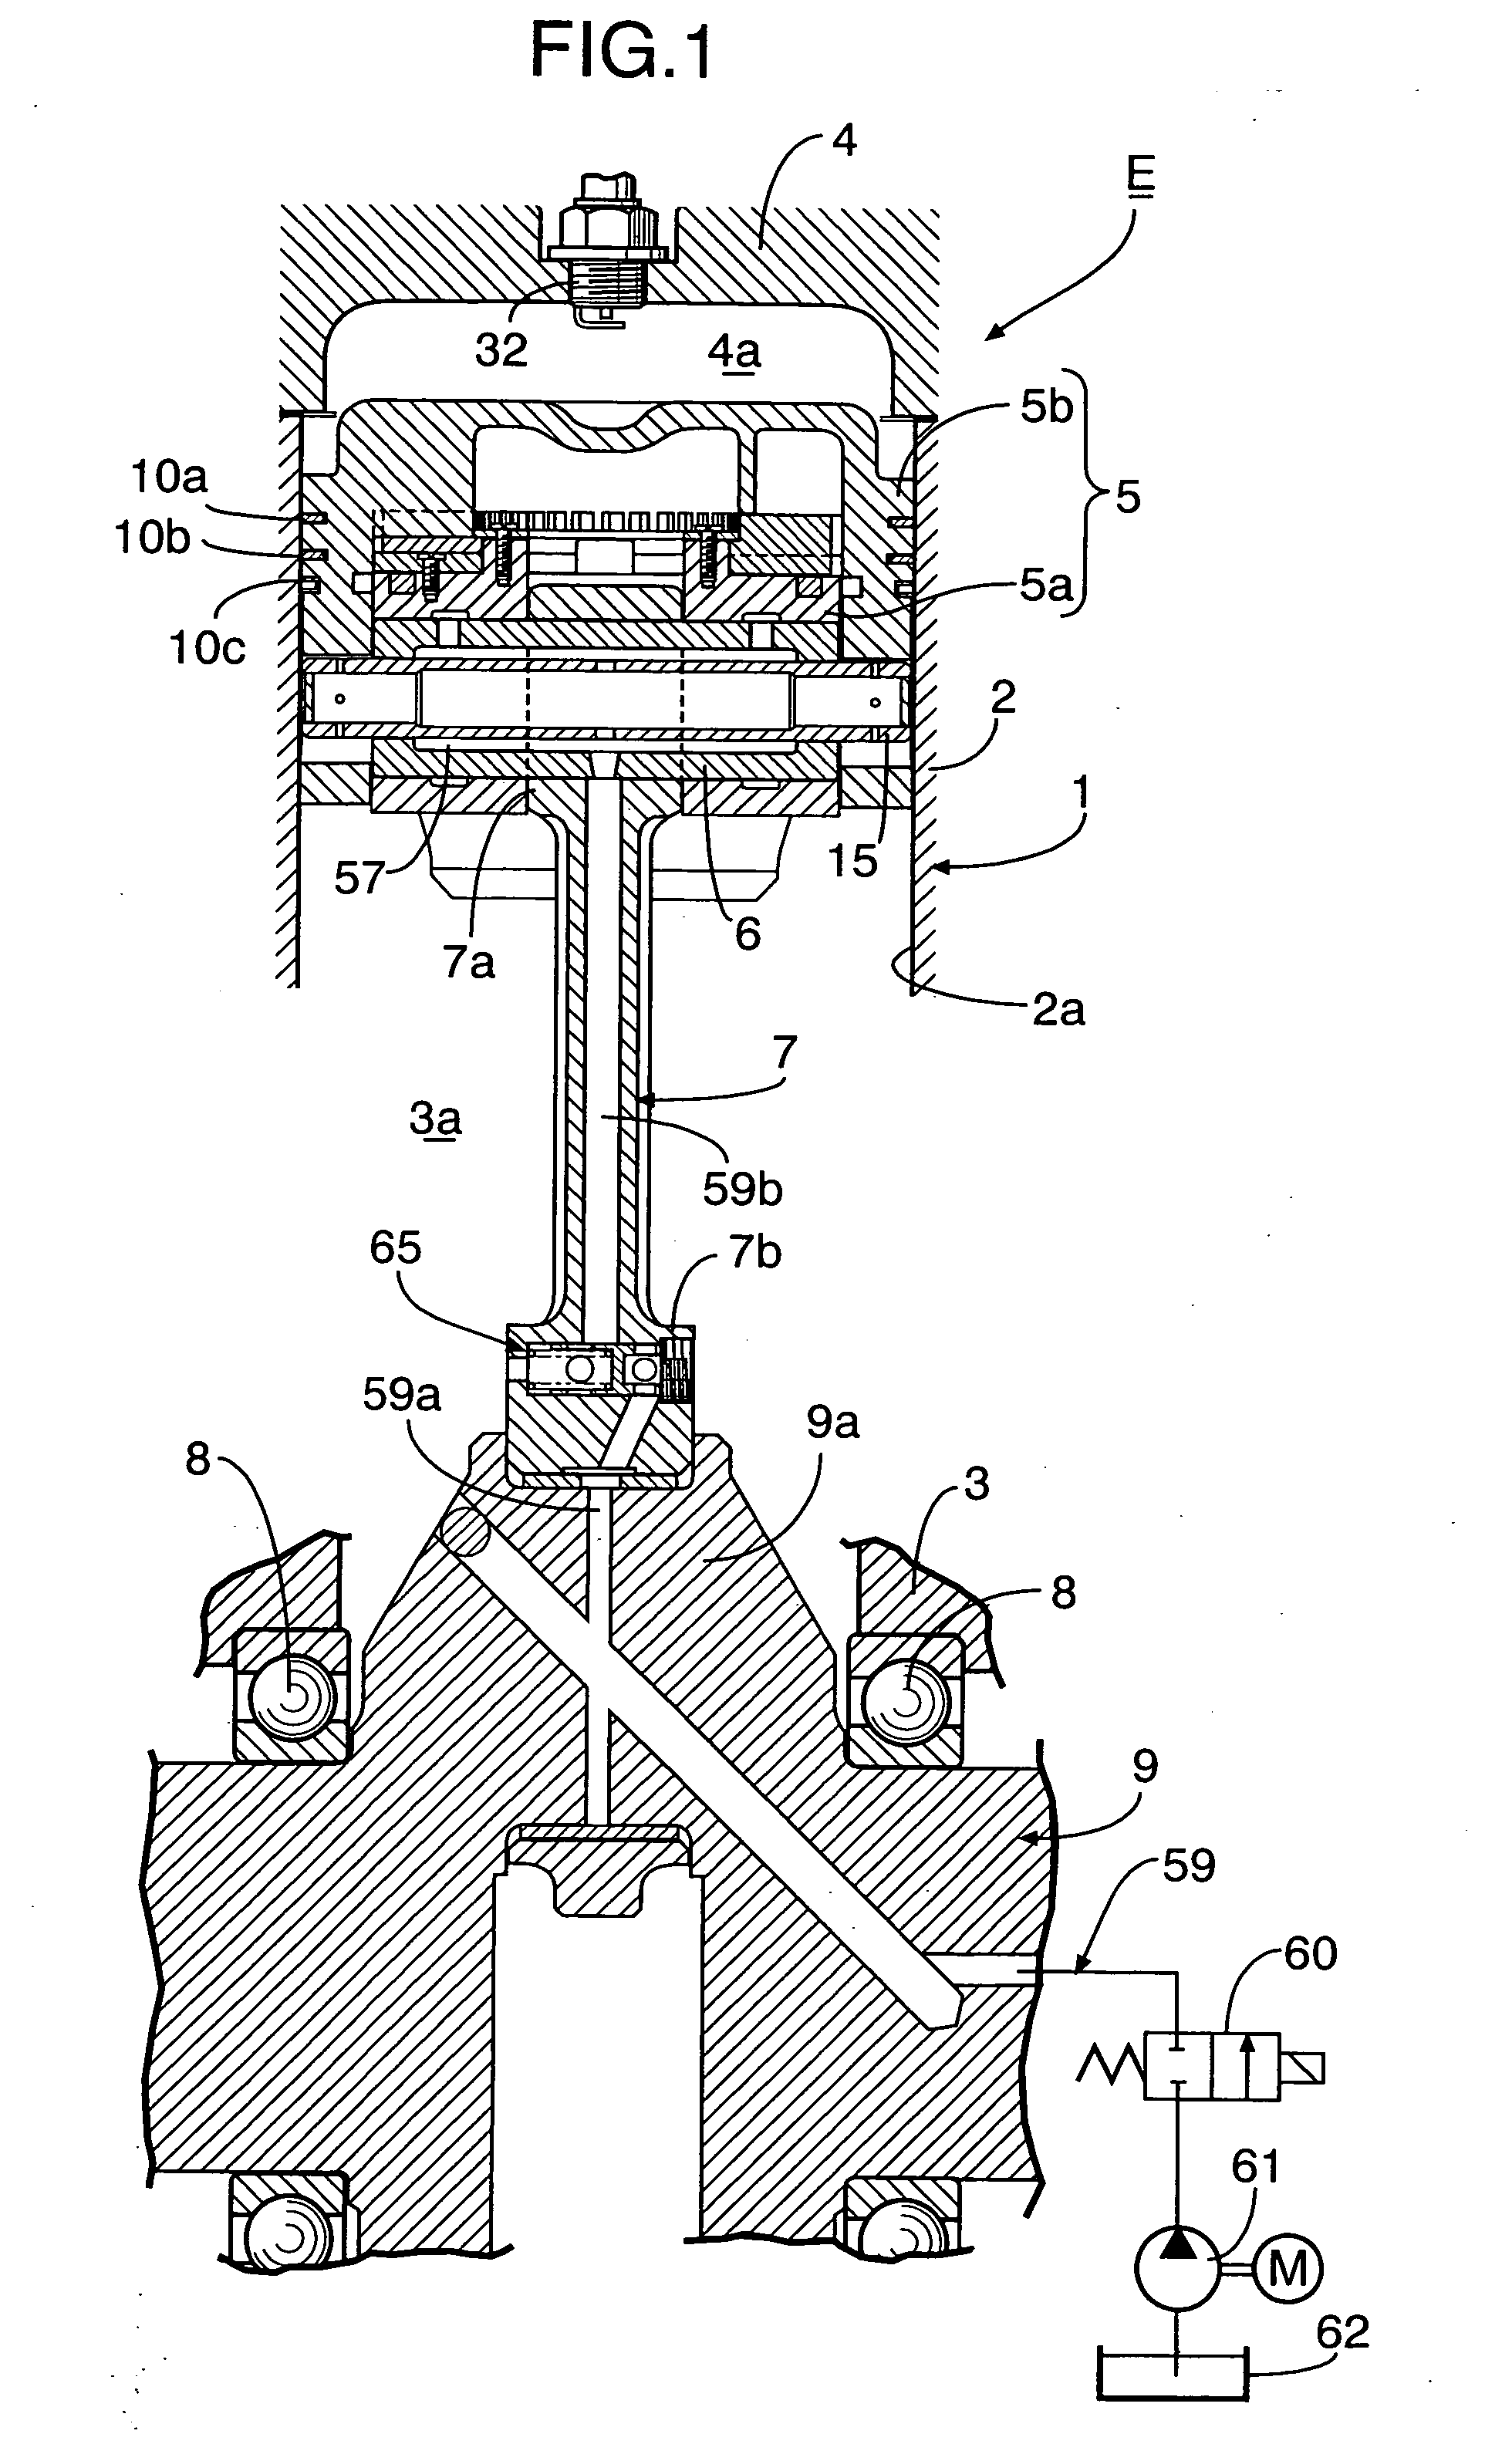 Control device for hydraulic actuator in piston